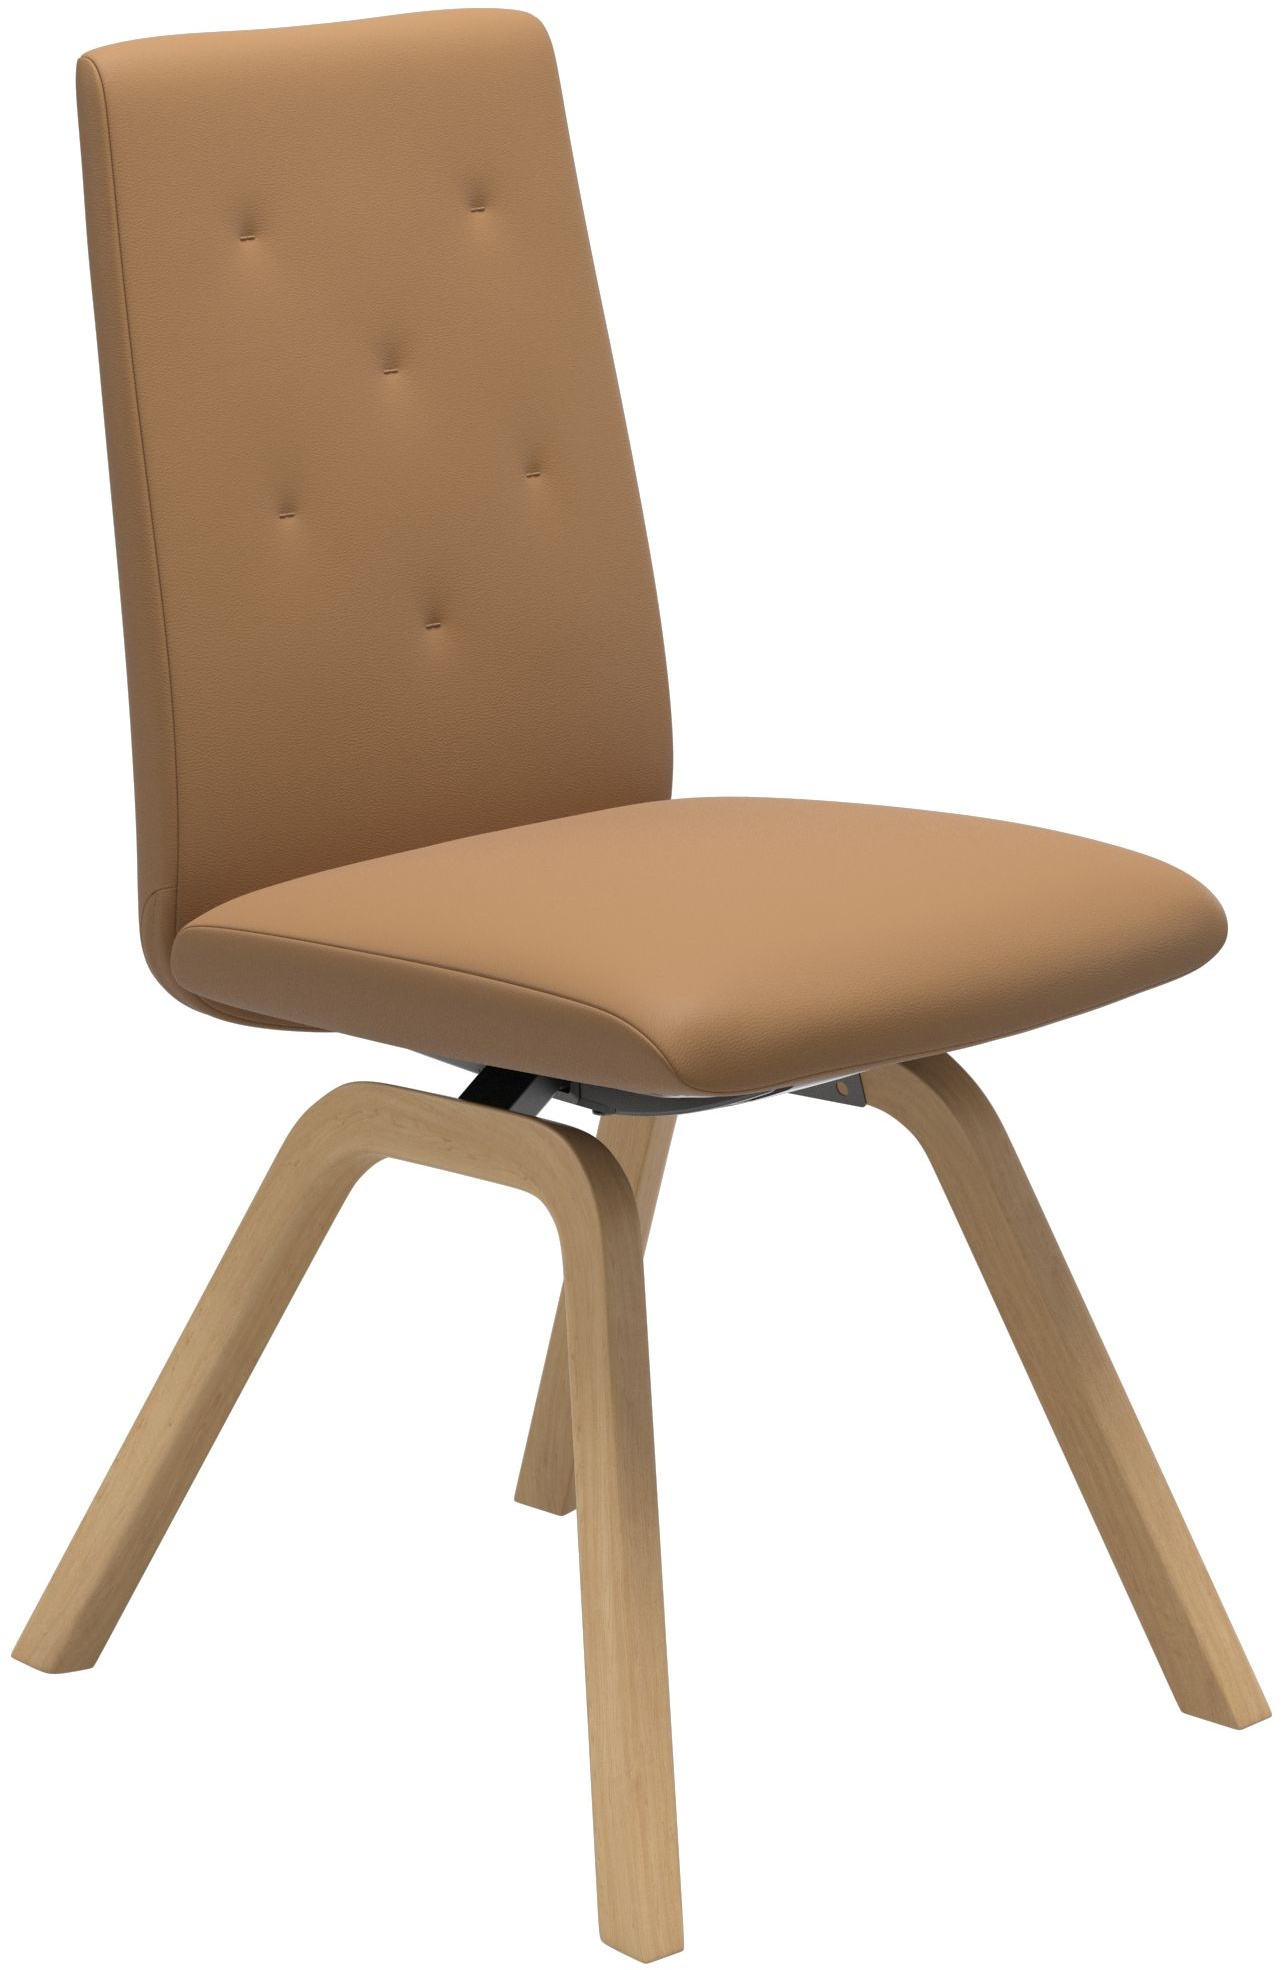 Scaun Stressless Rosemary v2 Low D200 M cadru natural tapiterie piele Paloma Taupe Living & Dining